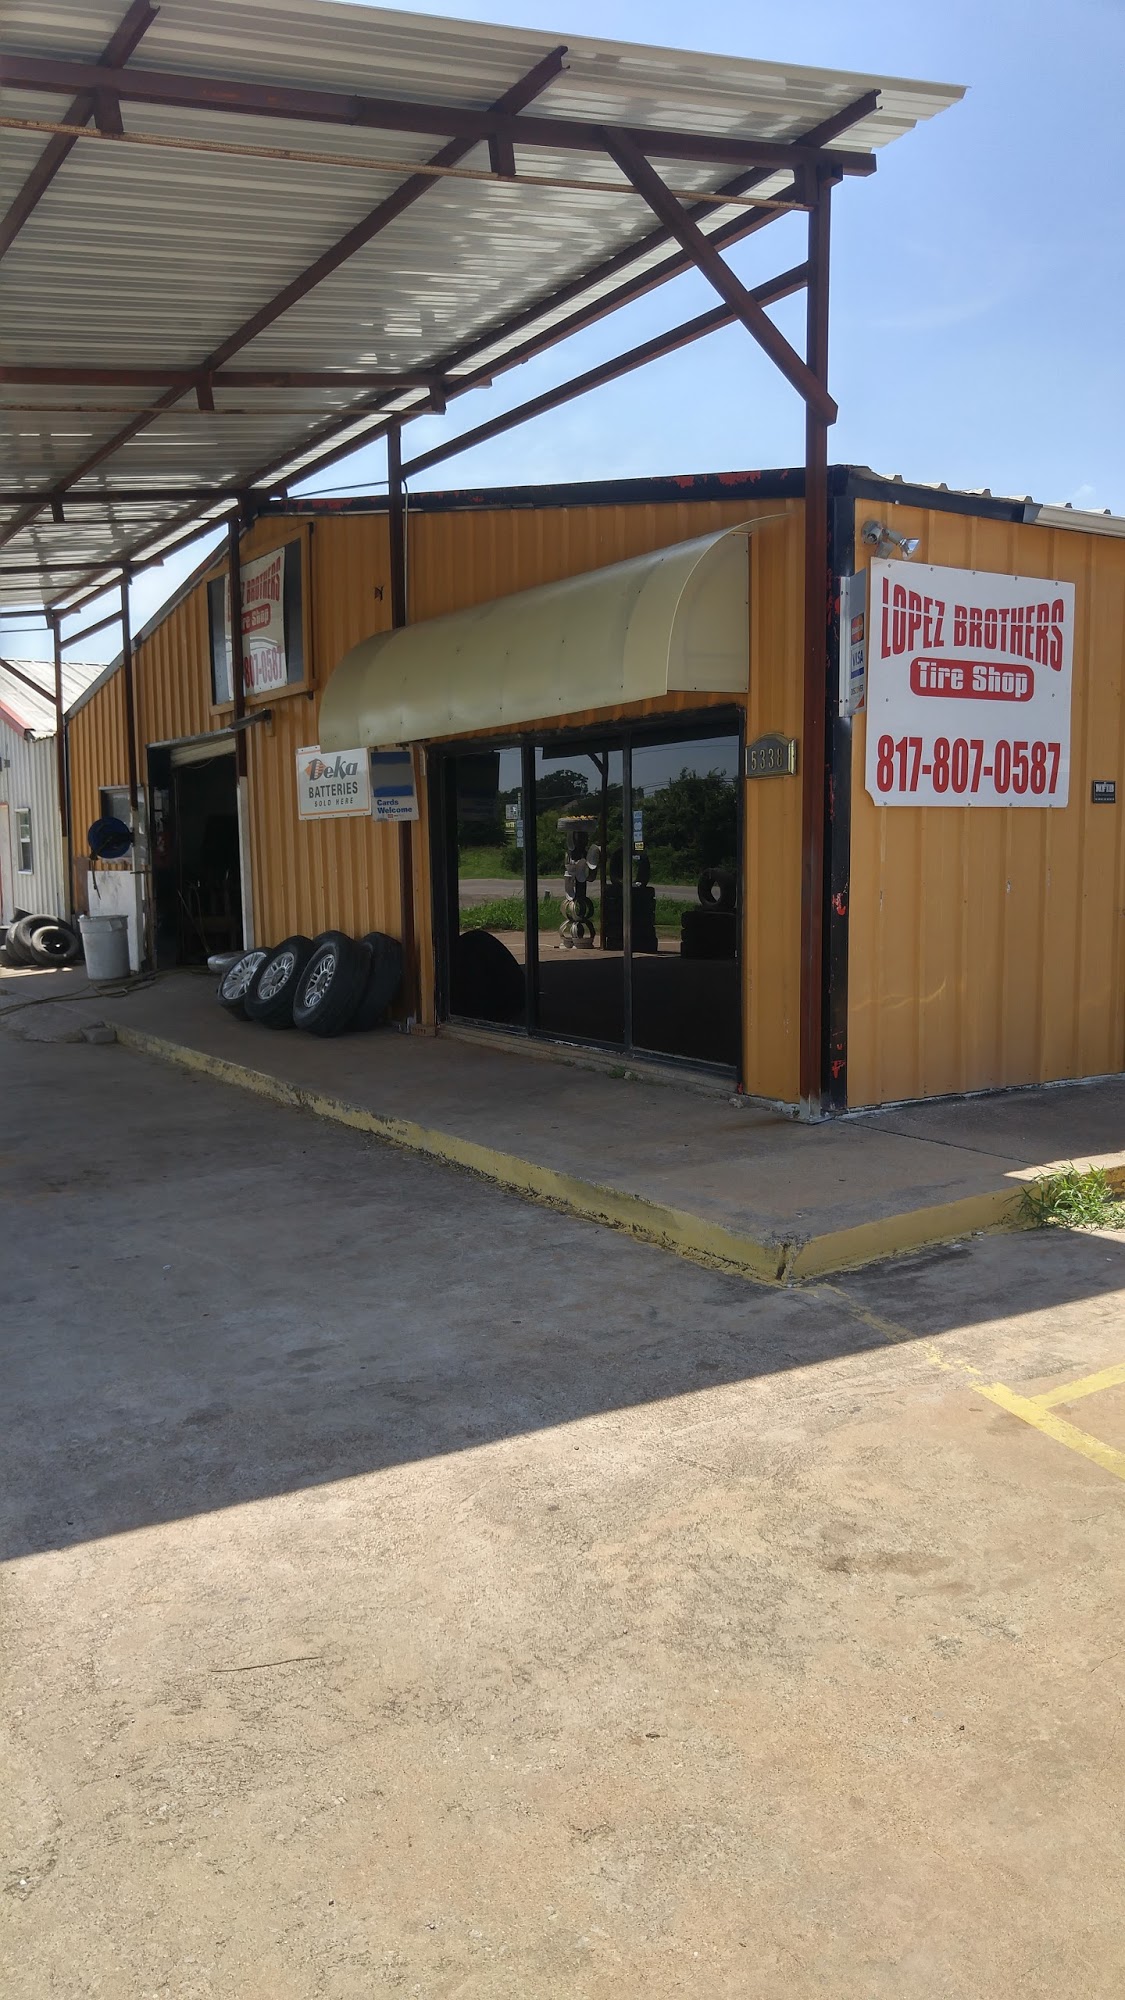 Lopez Brothers Tire Shop